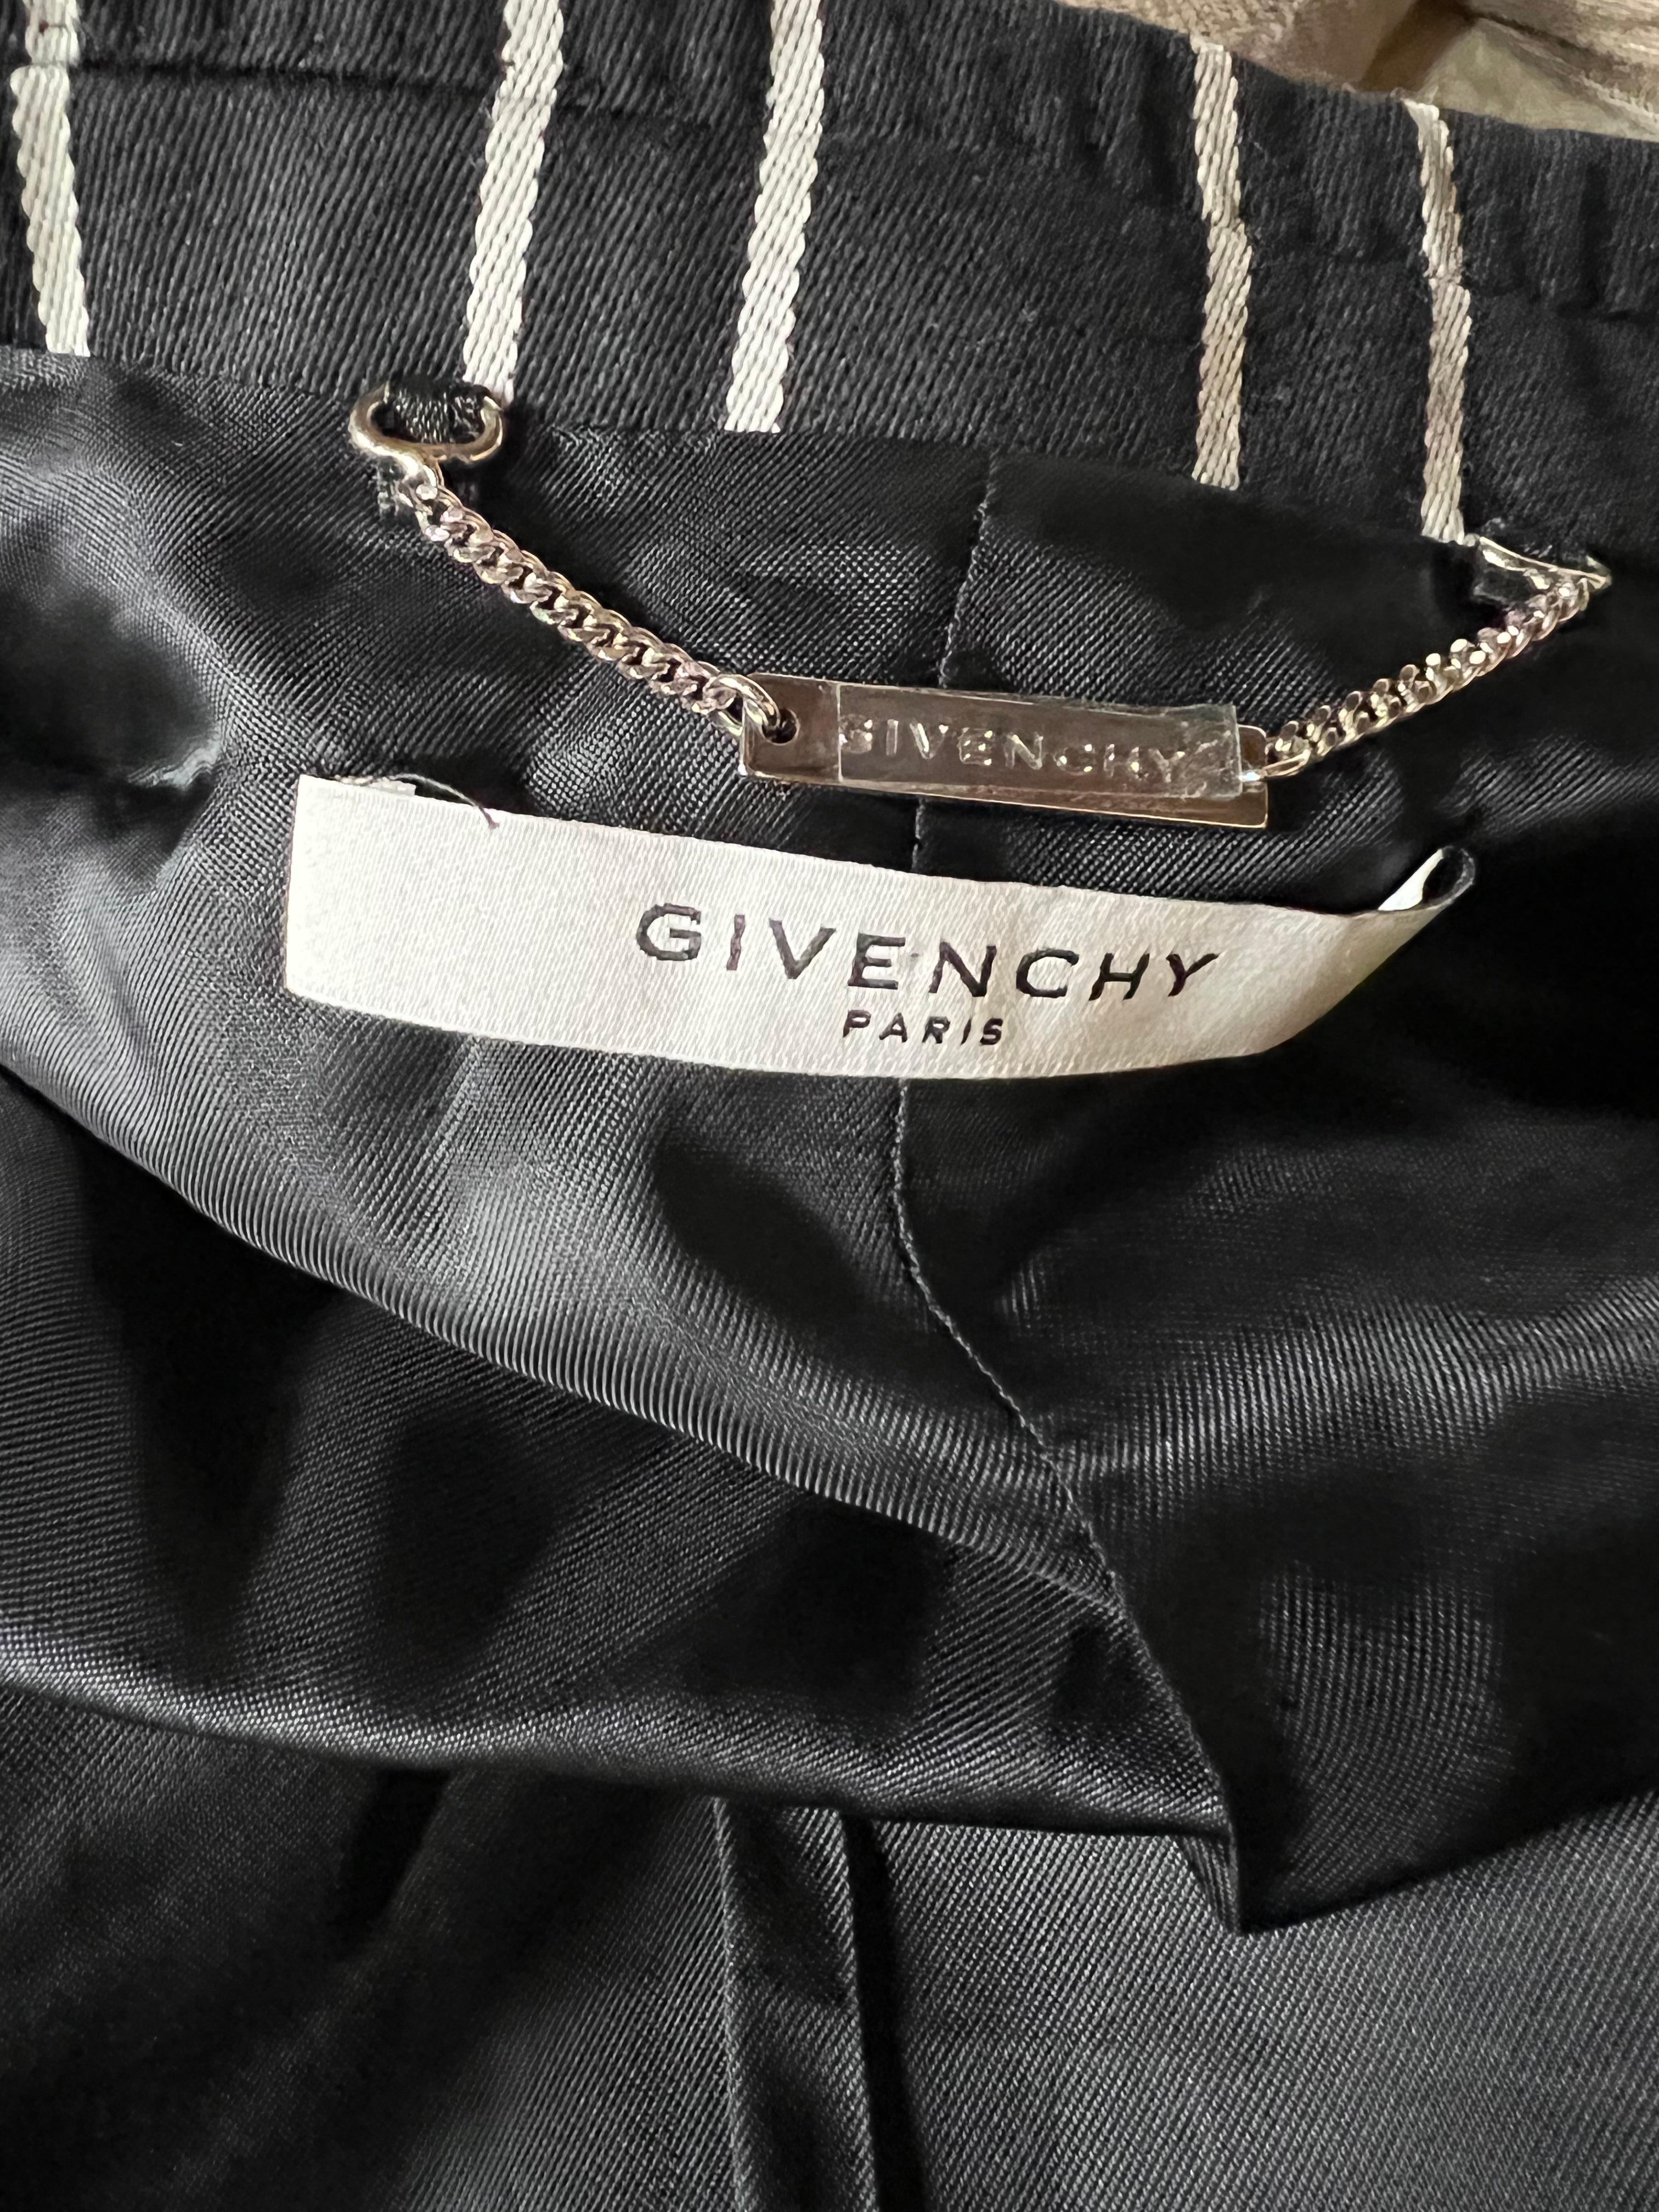 Givenchy Black and White Blazer Jacket, Size 40 For Sale 2